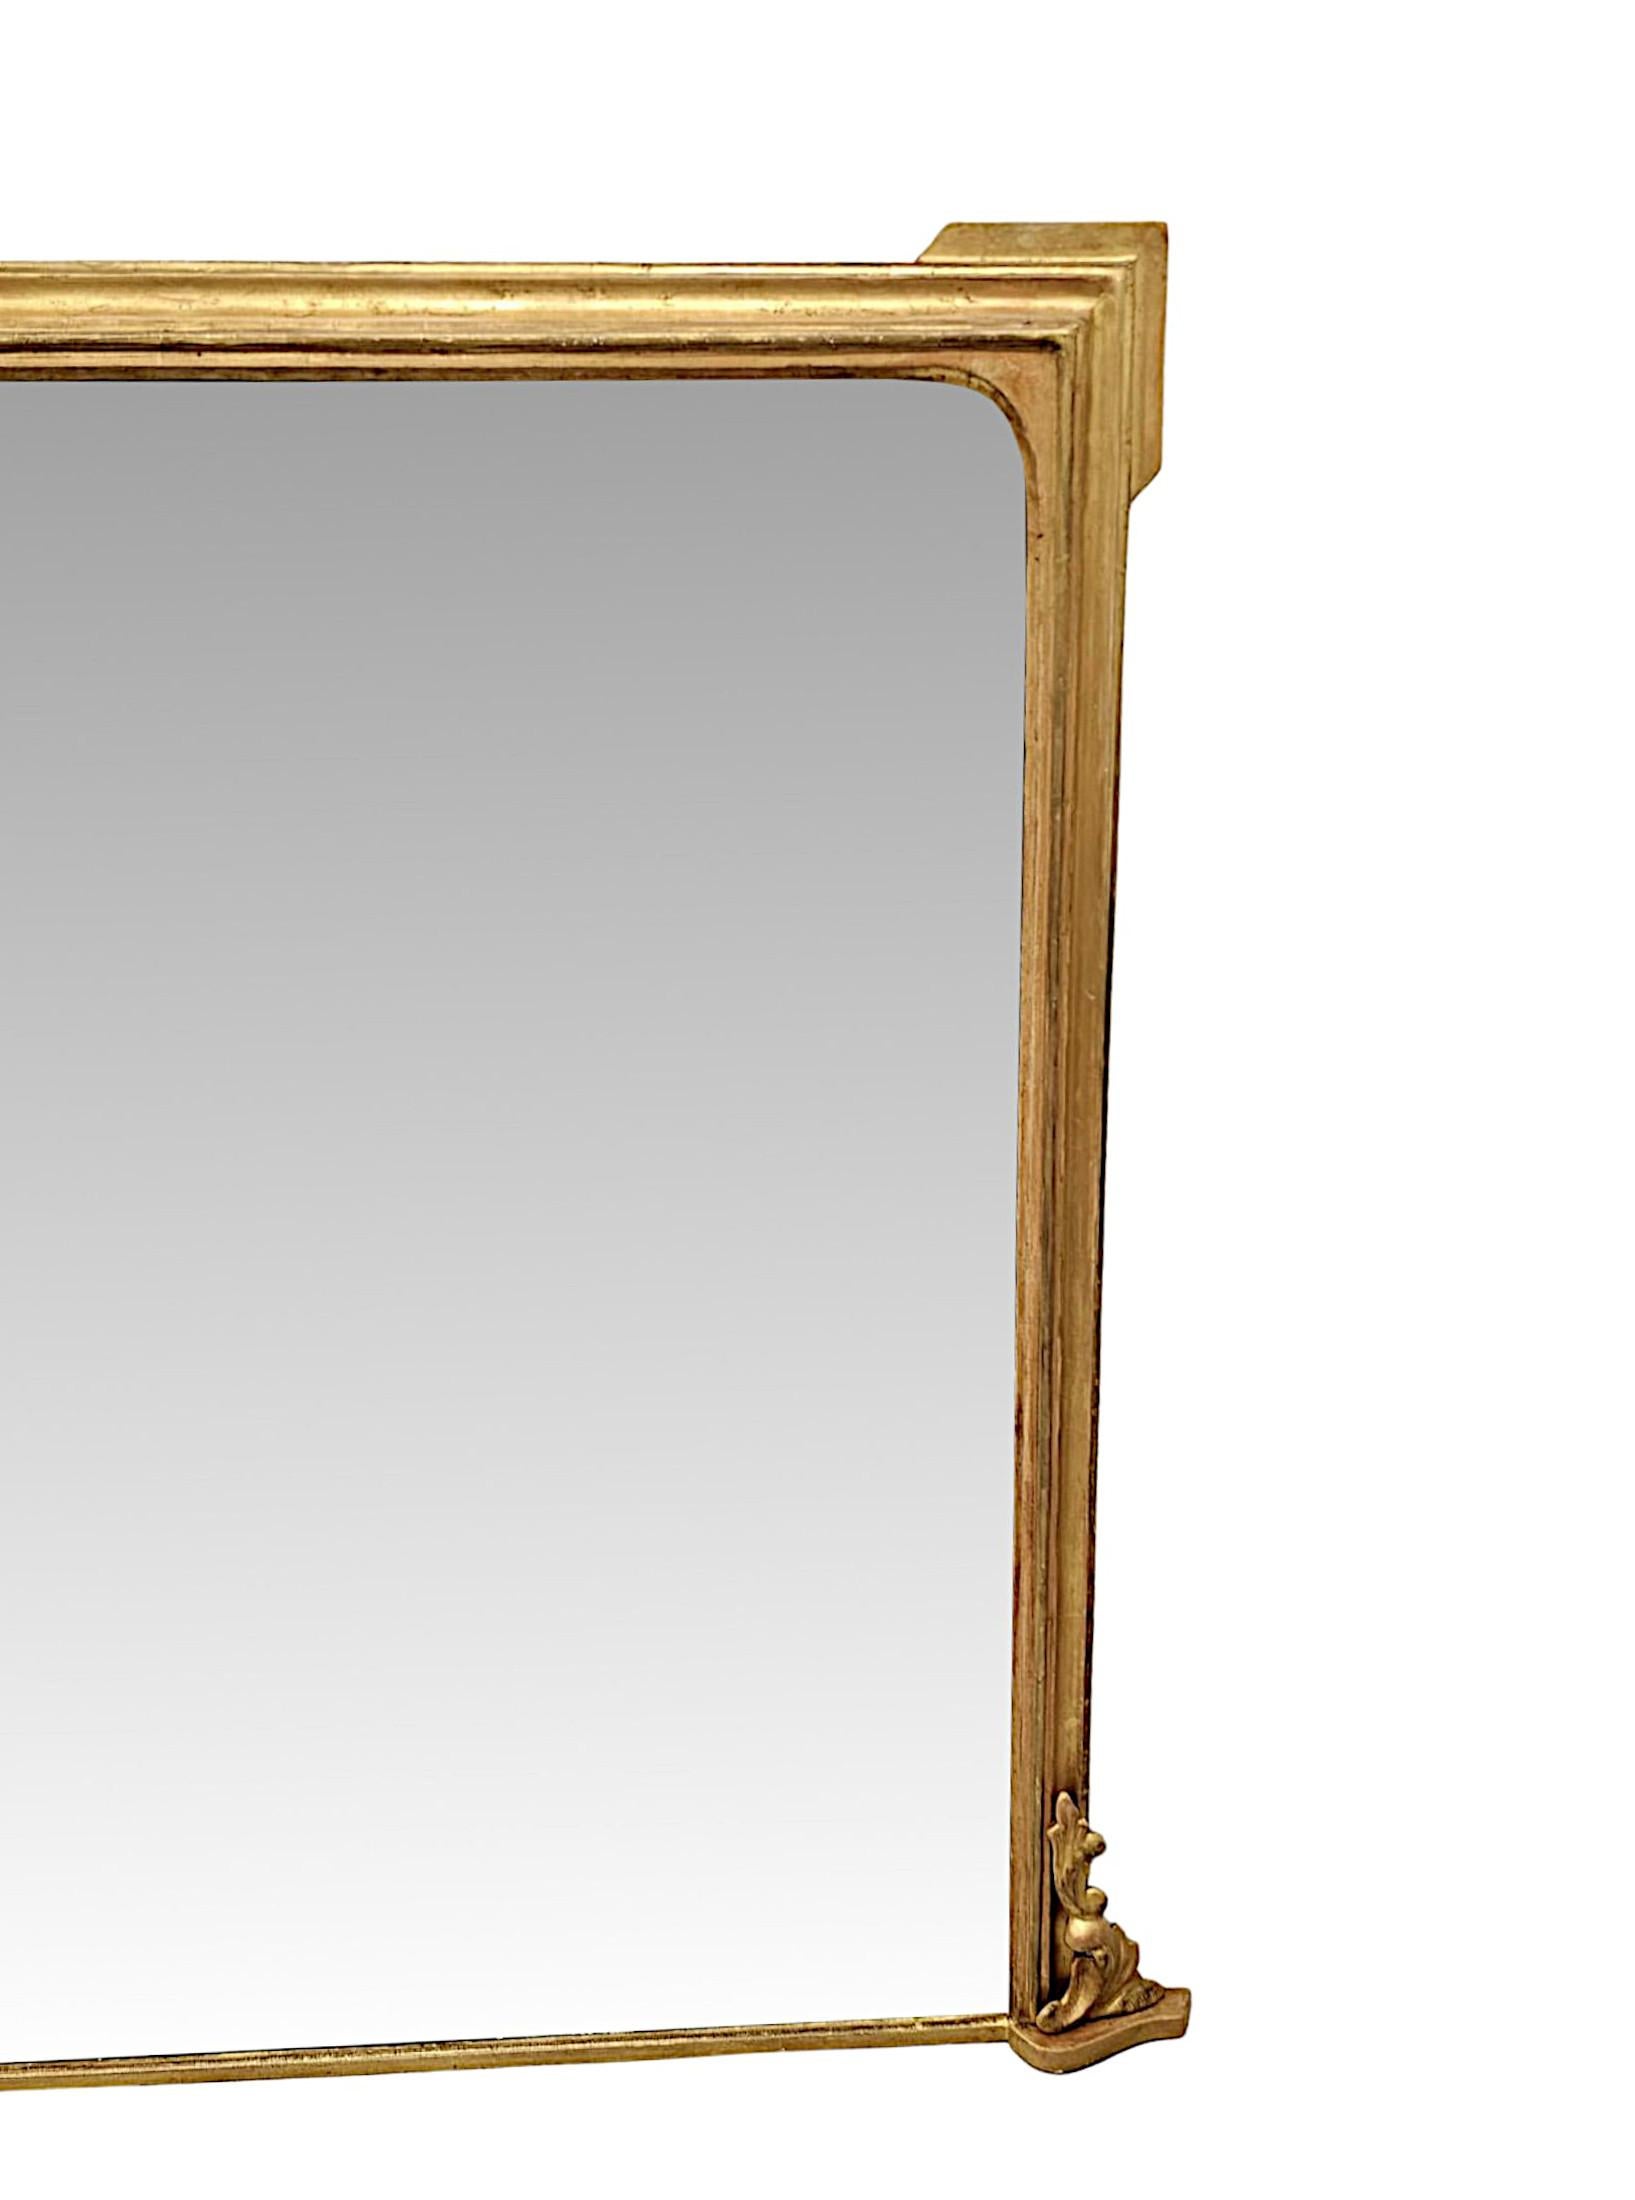 English A Fabulous Large Size 19th Century Giltwood Overmantel Mirror For Sale